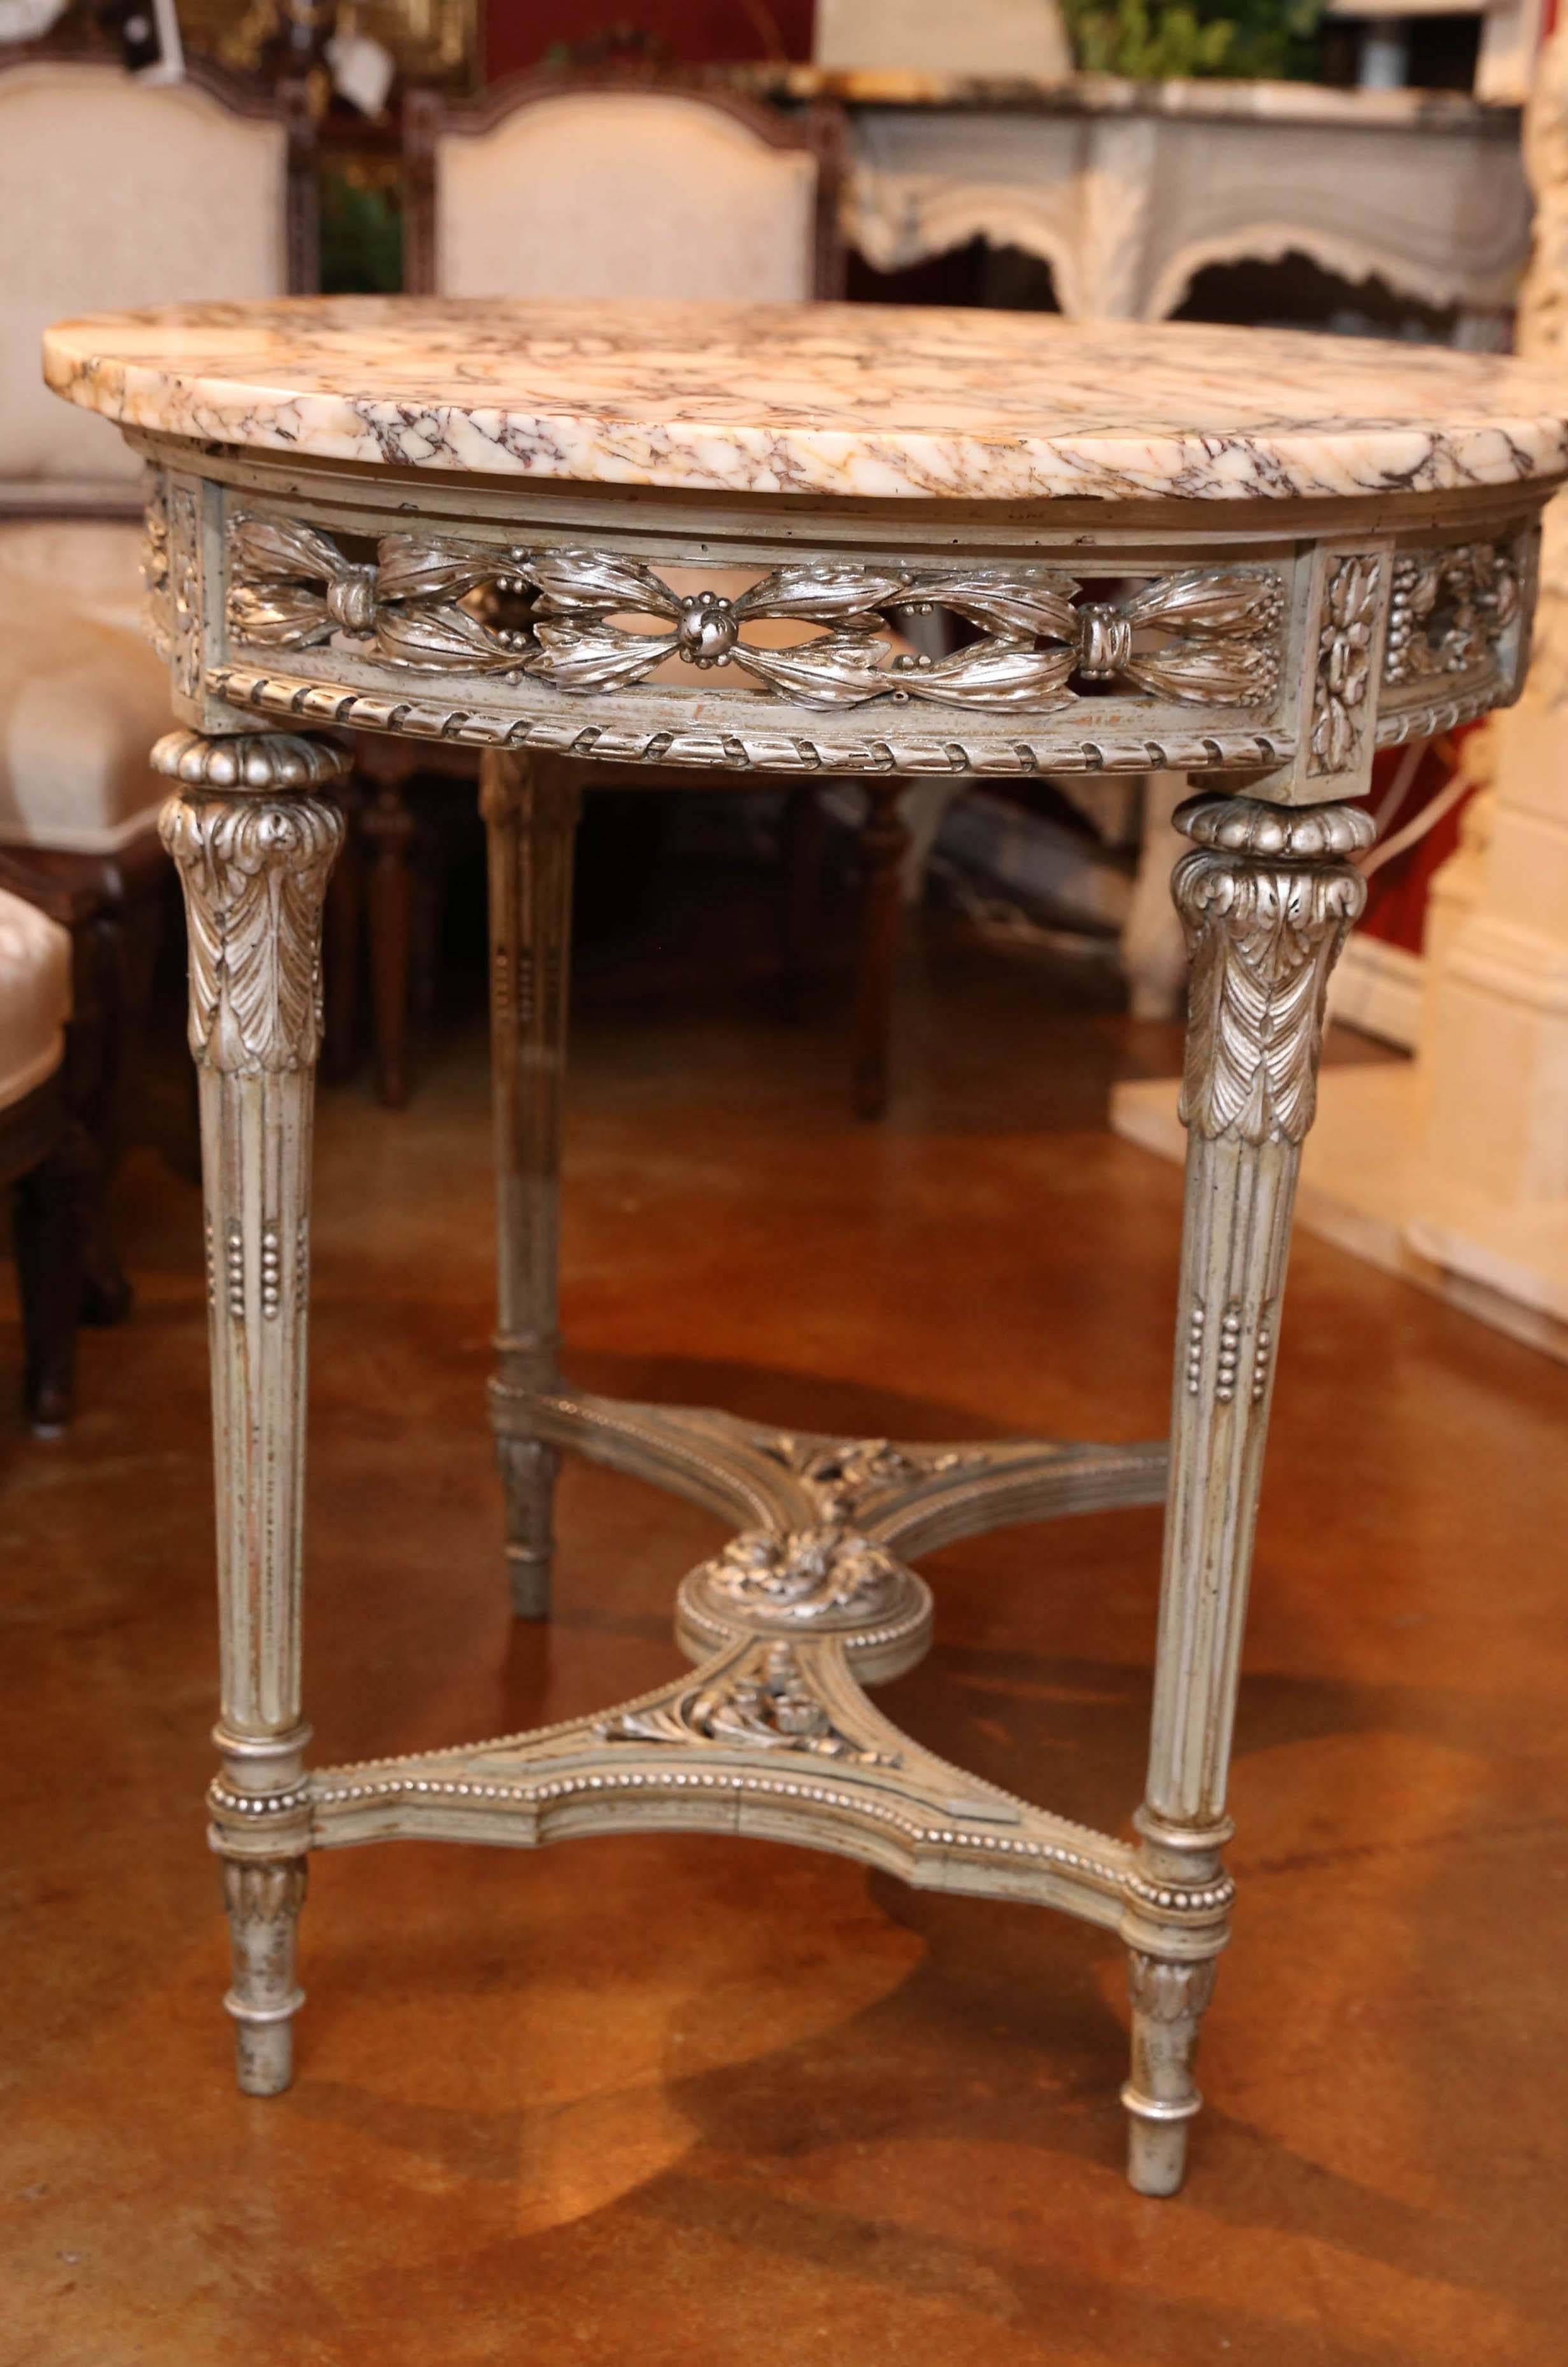 19th Century French Center Table, Painted in Gray Green/Silver Accents 4